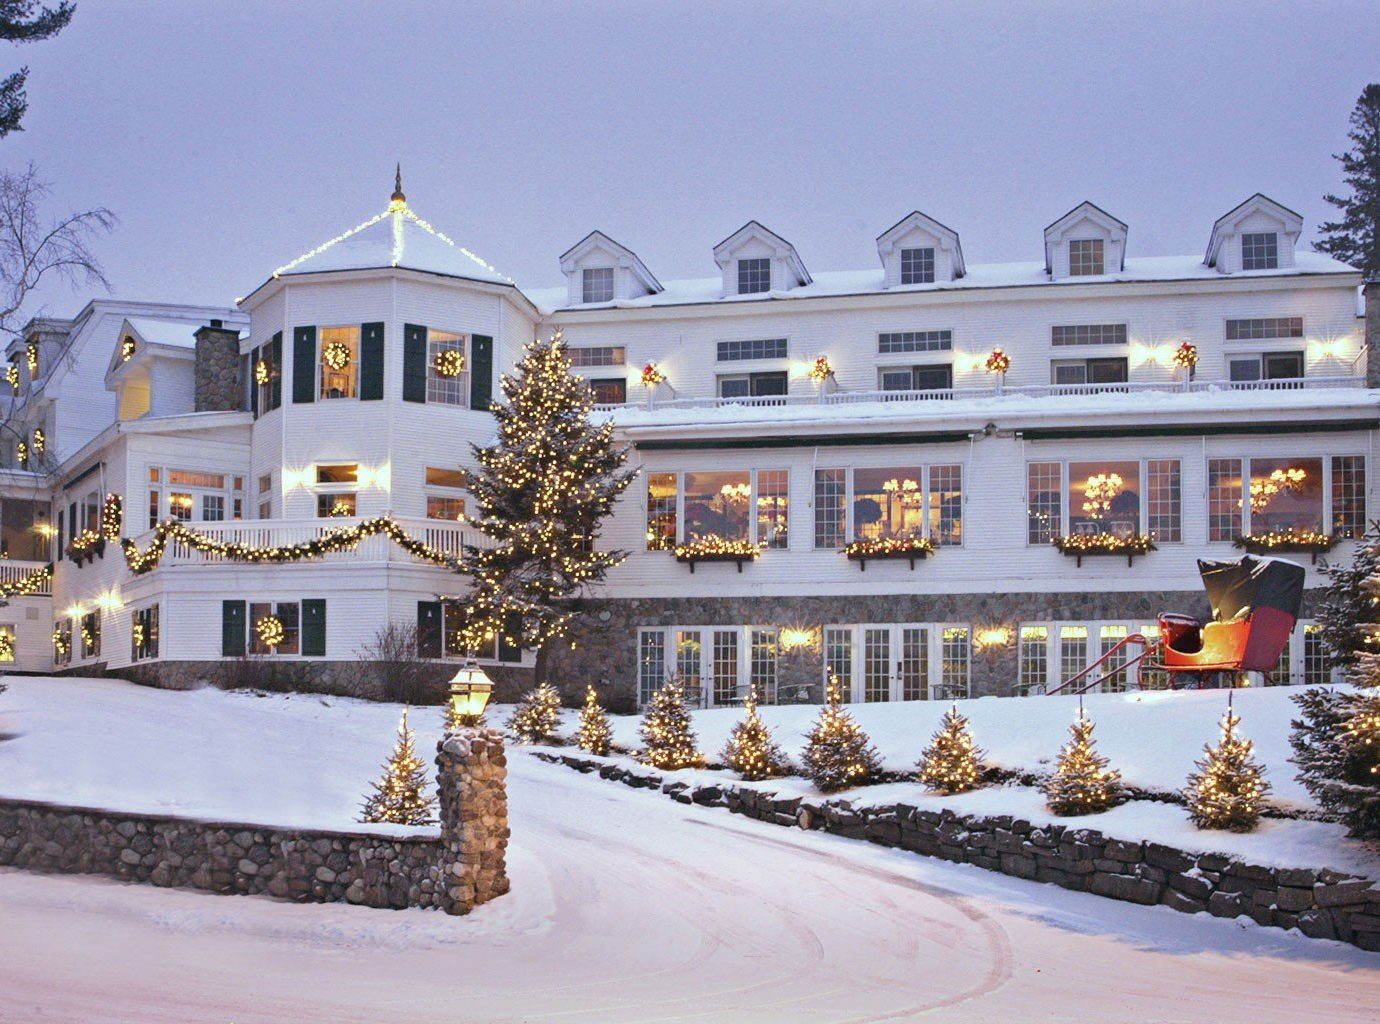 Trip Ideas sky outdoor snow Winter house estate home palace Resort Christmas ice rink